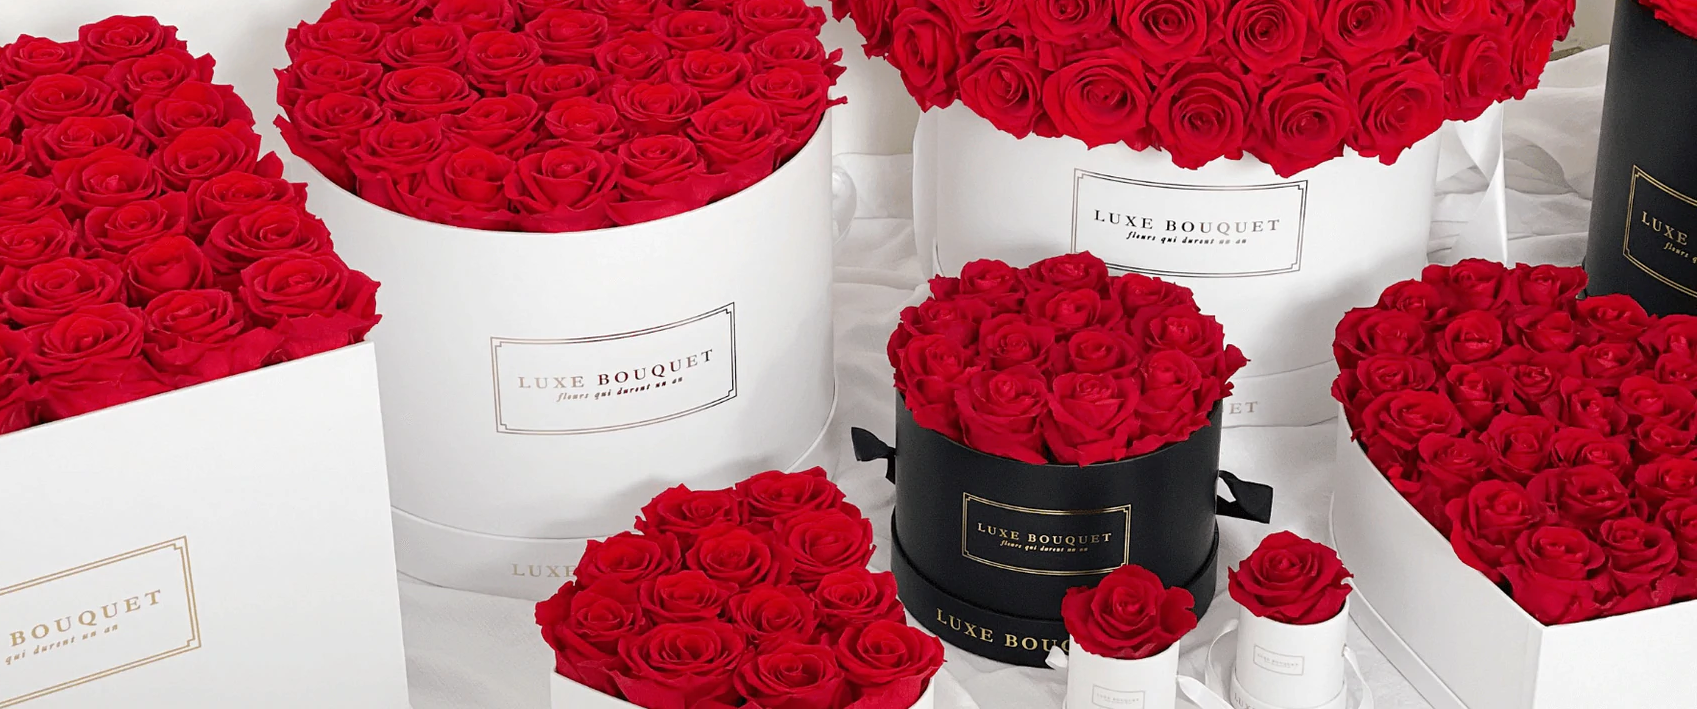 All Luxe Bouquet Australia Finds, Options, Promo Codes & Vegan Specials